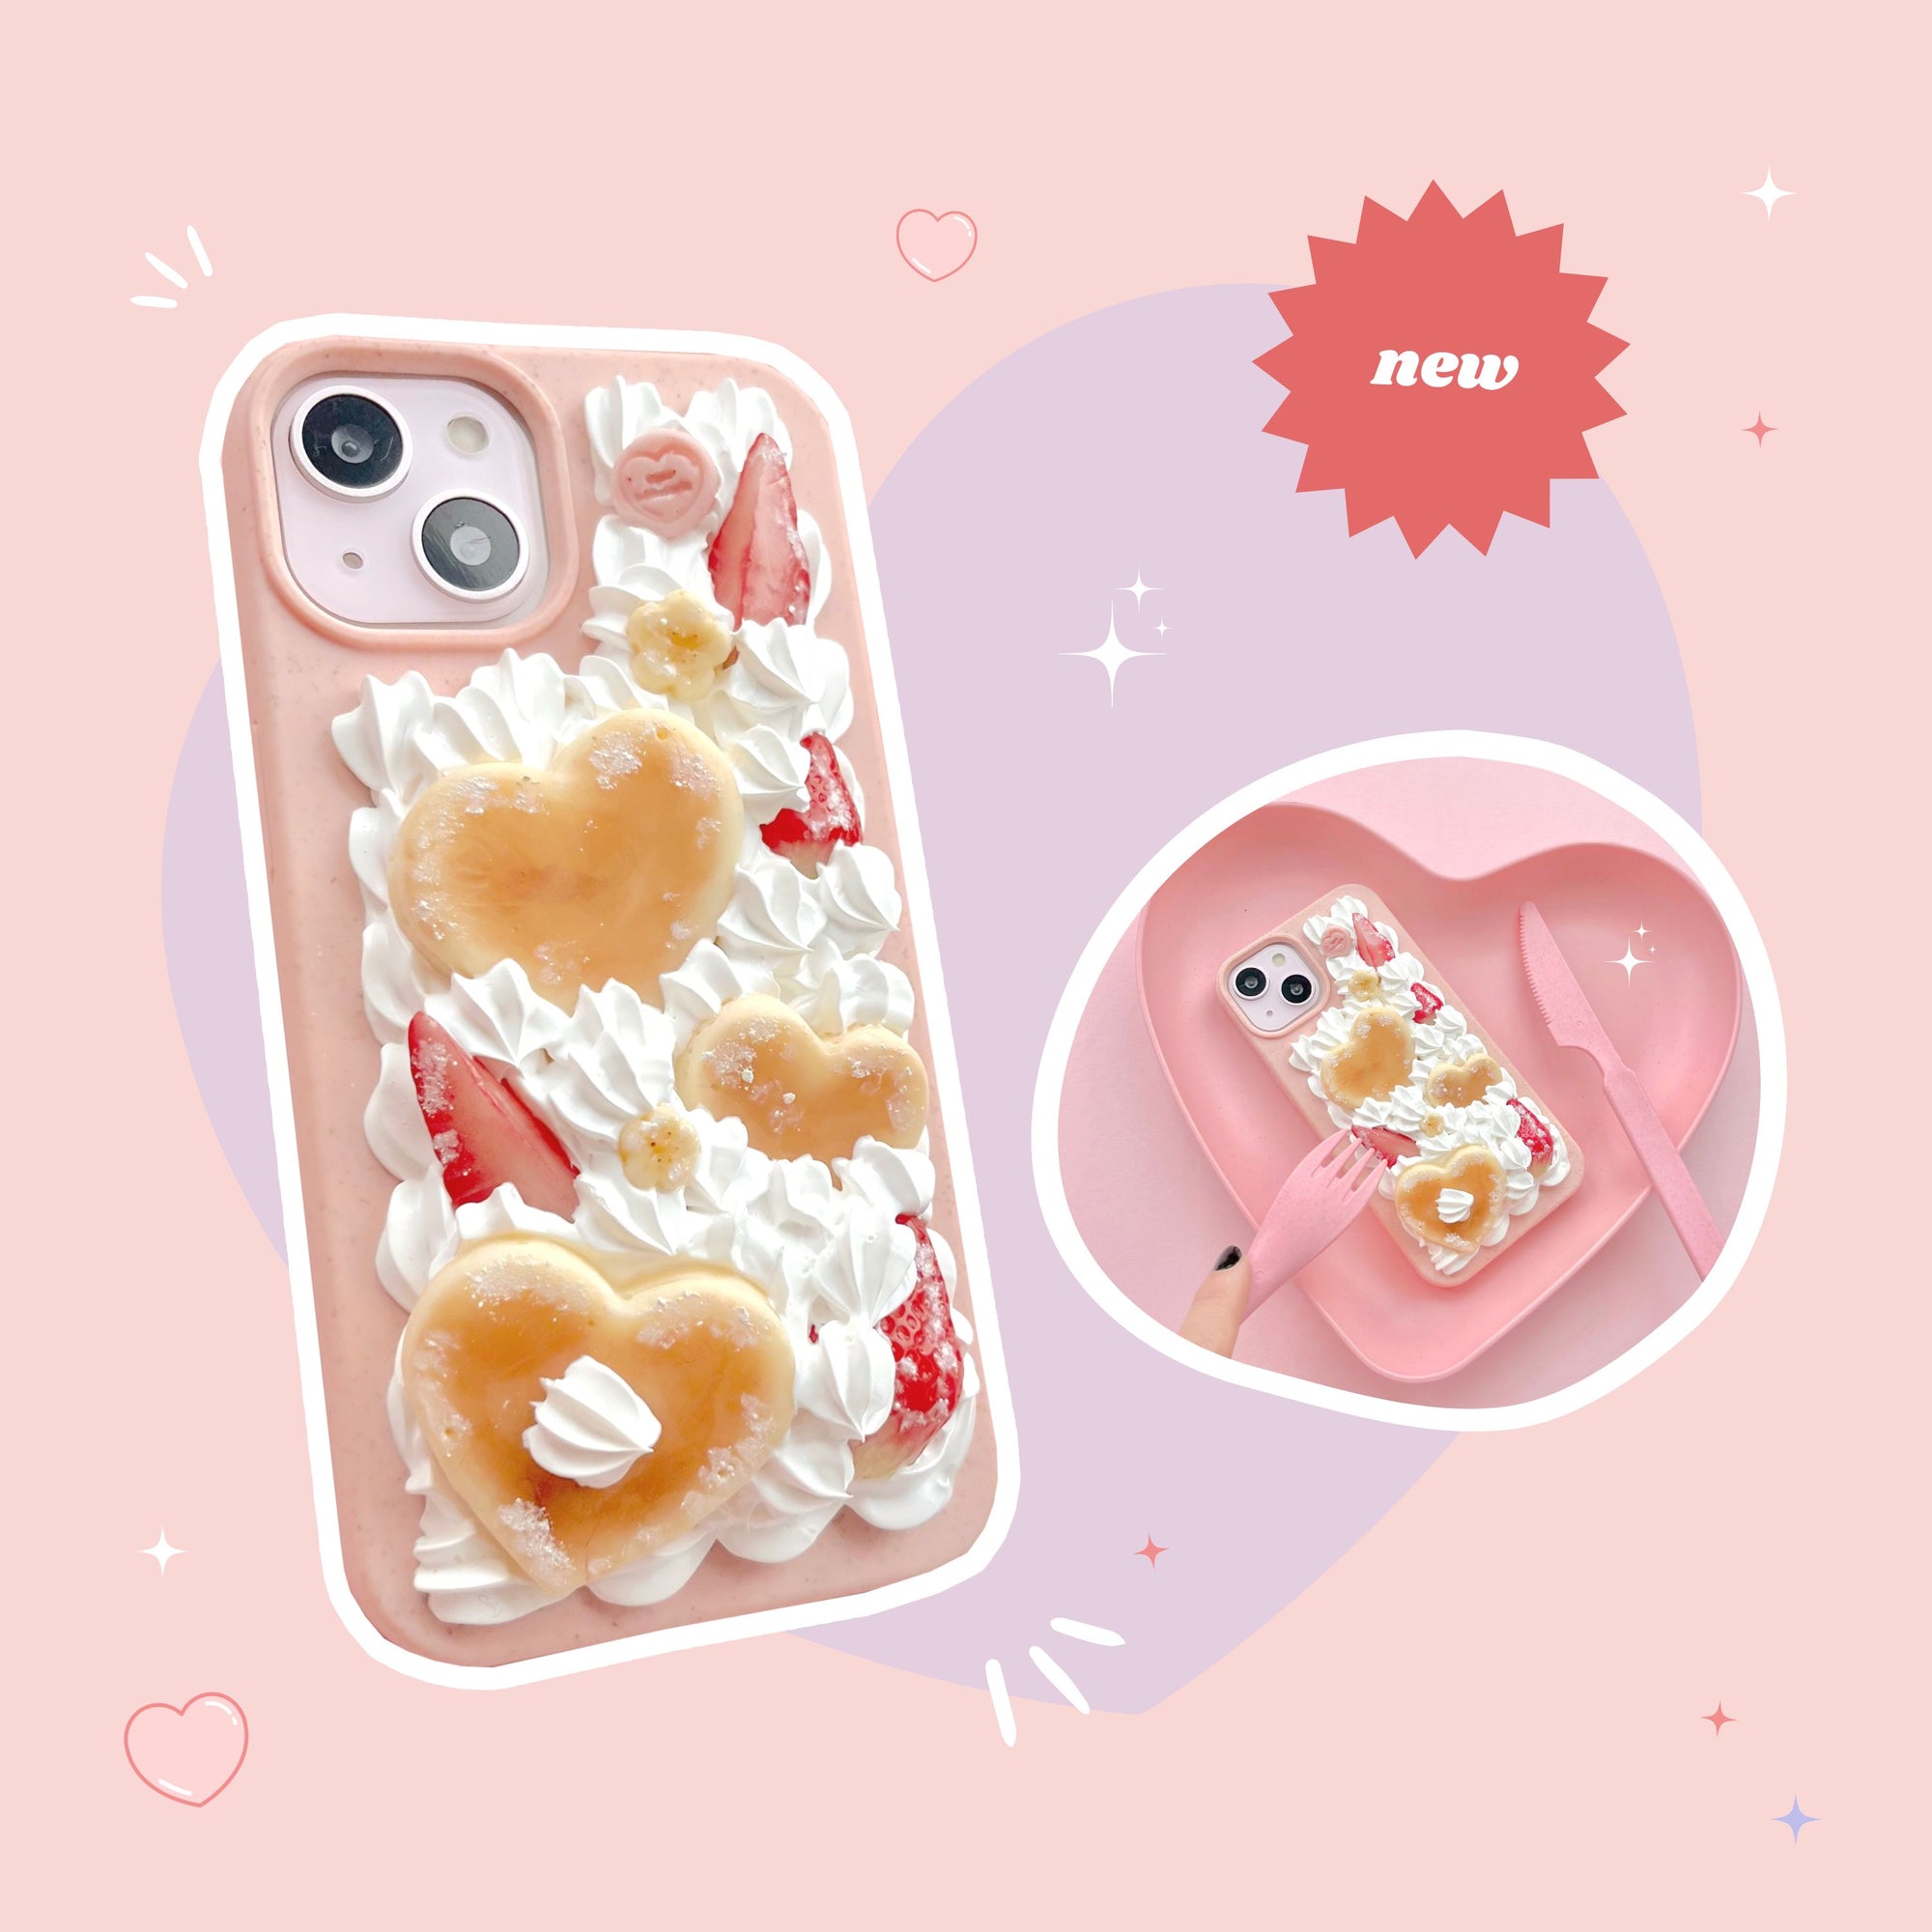 Whipped cream and lilac syrup decoden